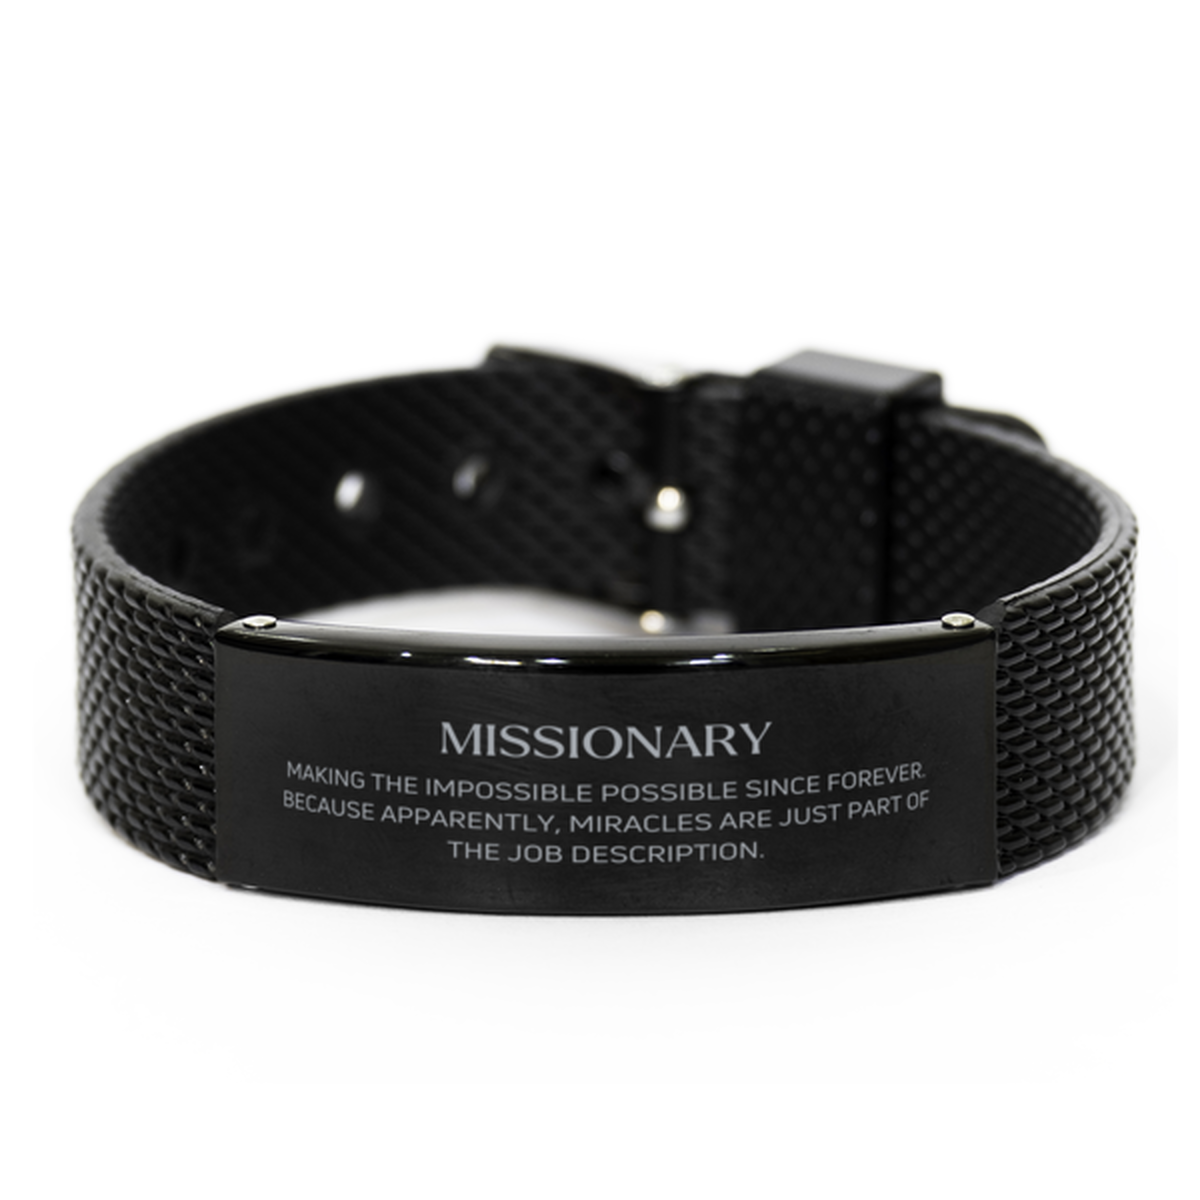 Funny Missionary Gifts, Miracles are just part of the job description, Inspirational Birthday Black Shark Mesh Bracelet For Missionary, Men, Women, Coworkers, Friends, Boss